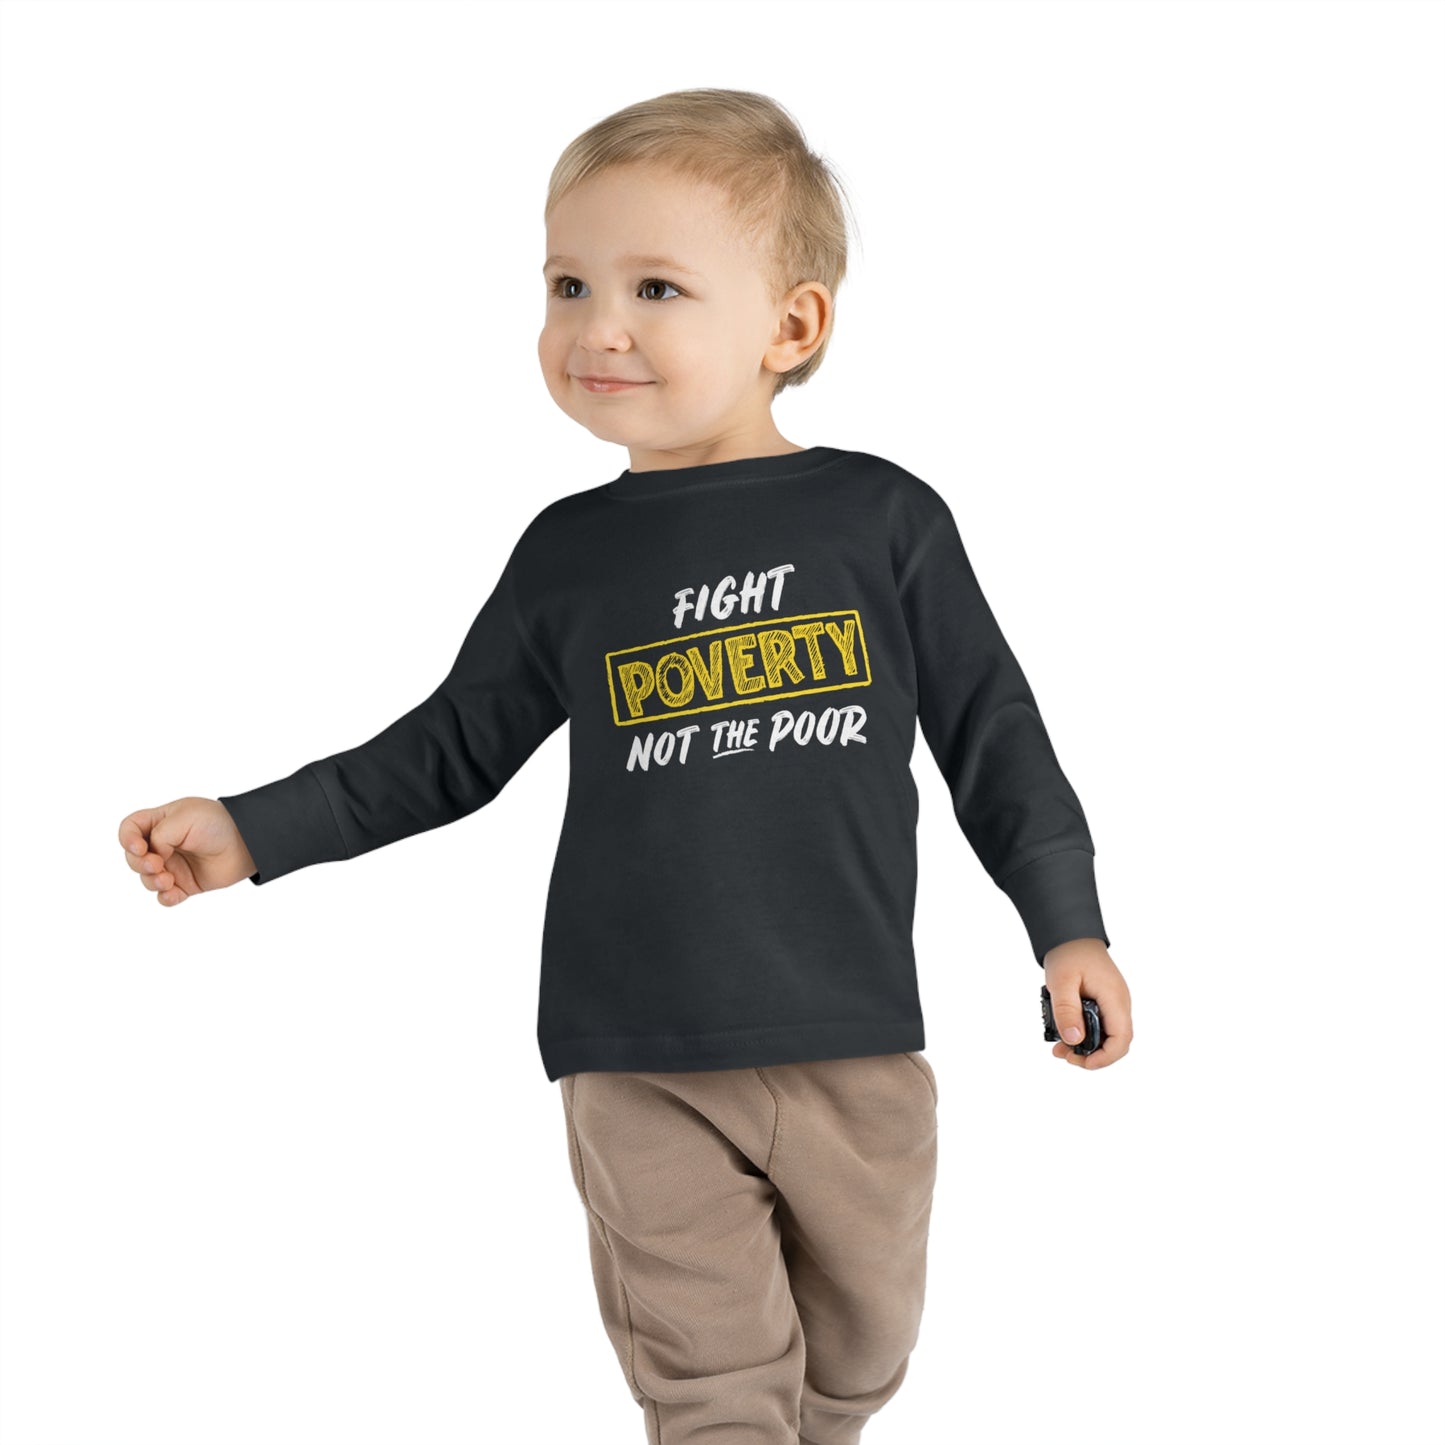 “Fight Poverty Not The Poor” Toddler Long Sleeve Tee